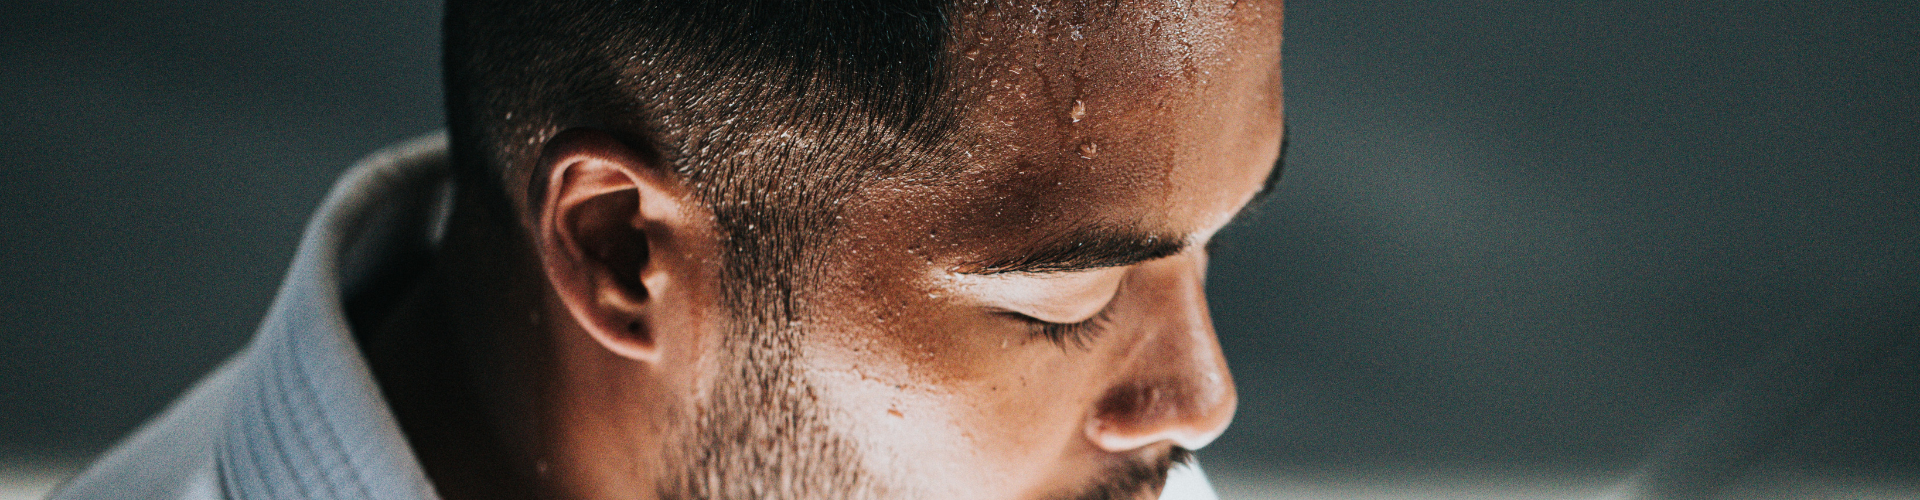 close up of a man's sweating forehead